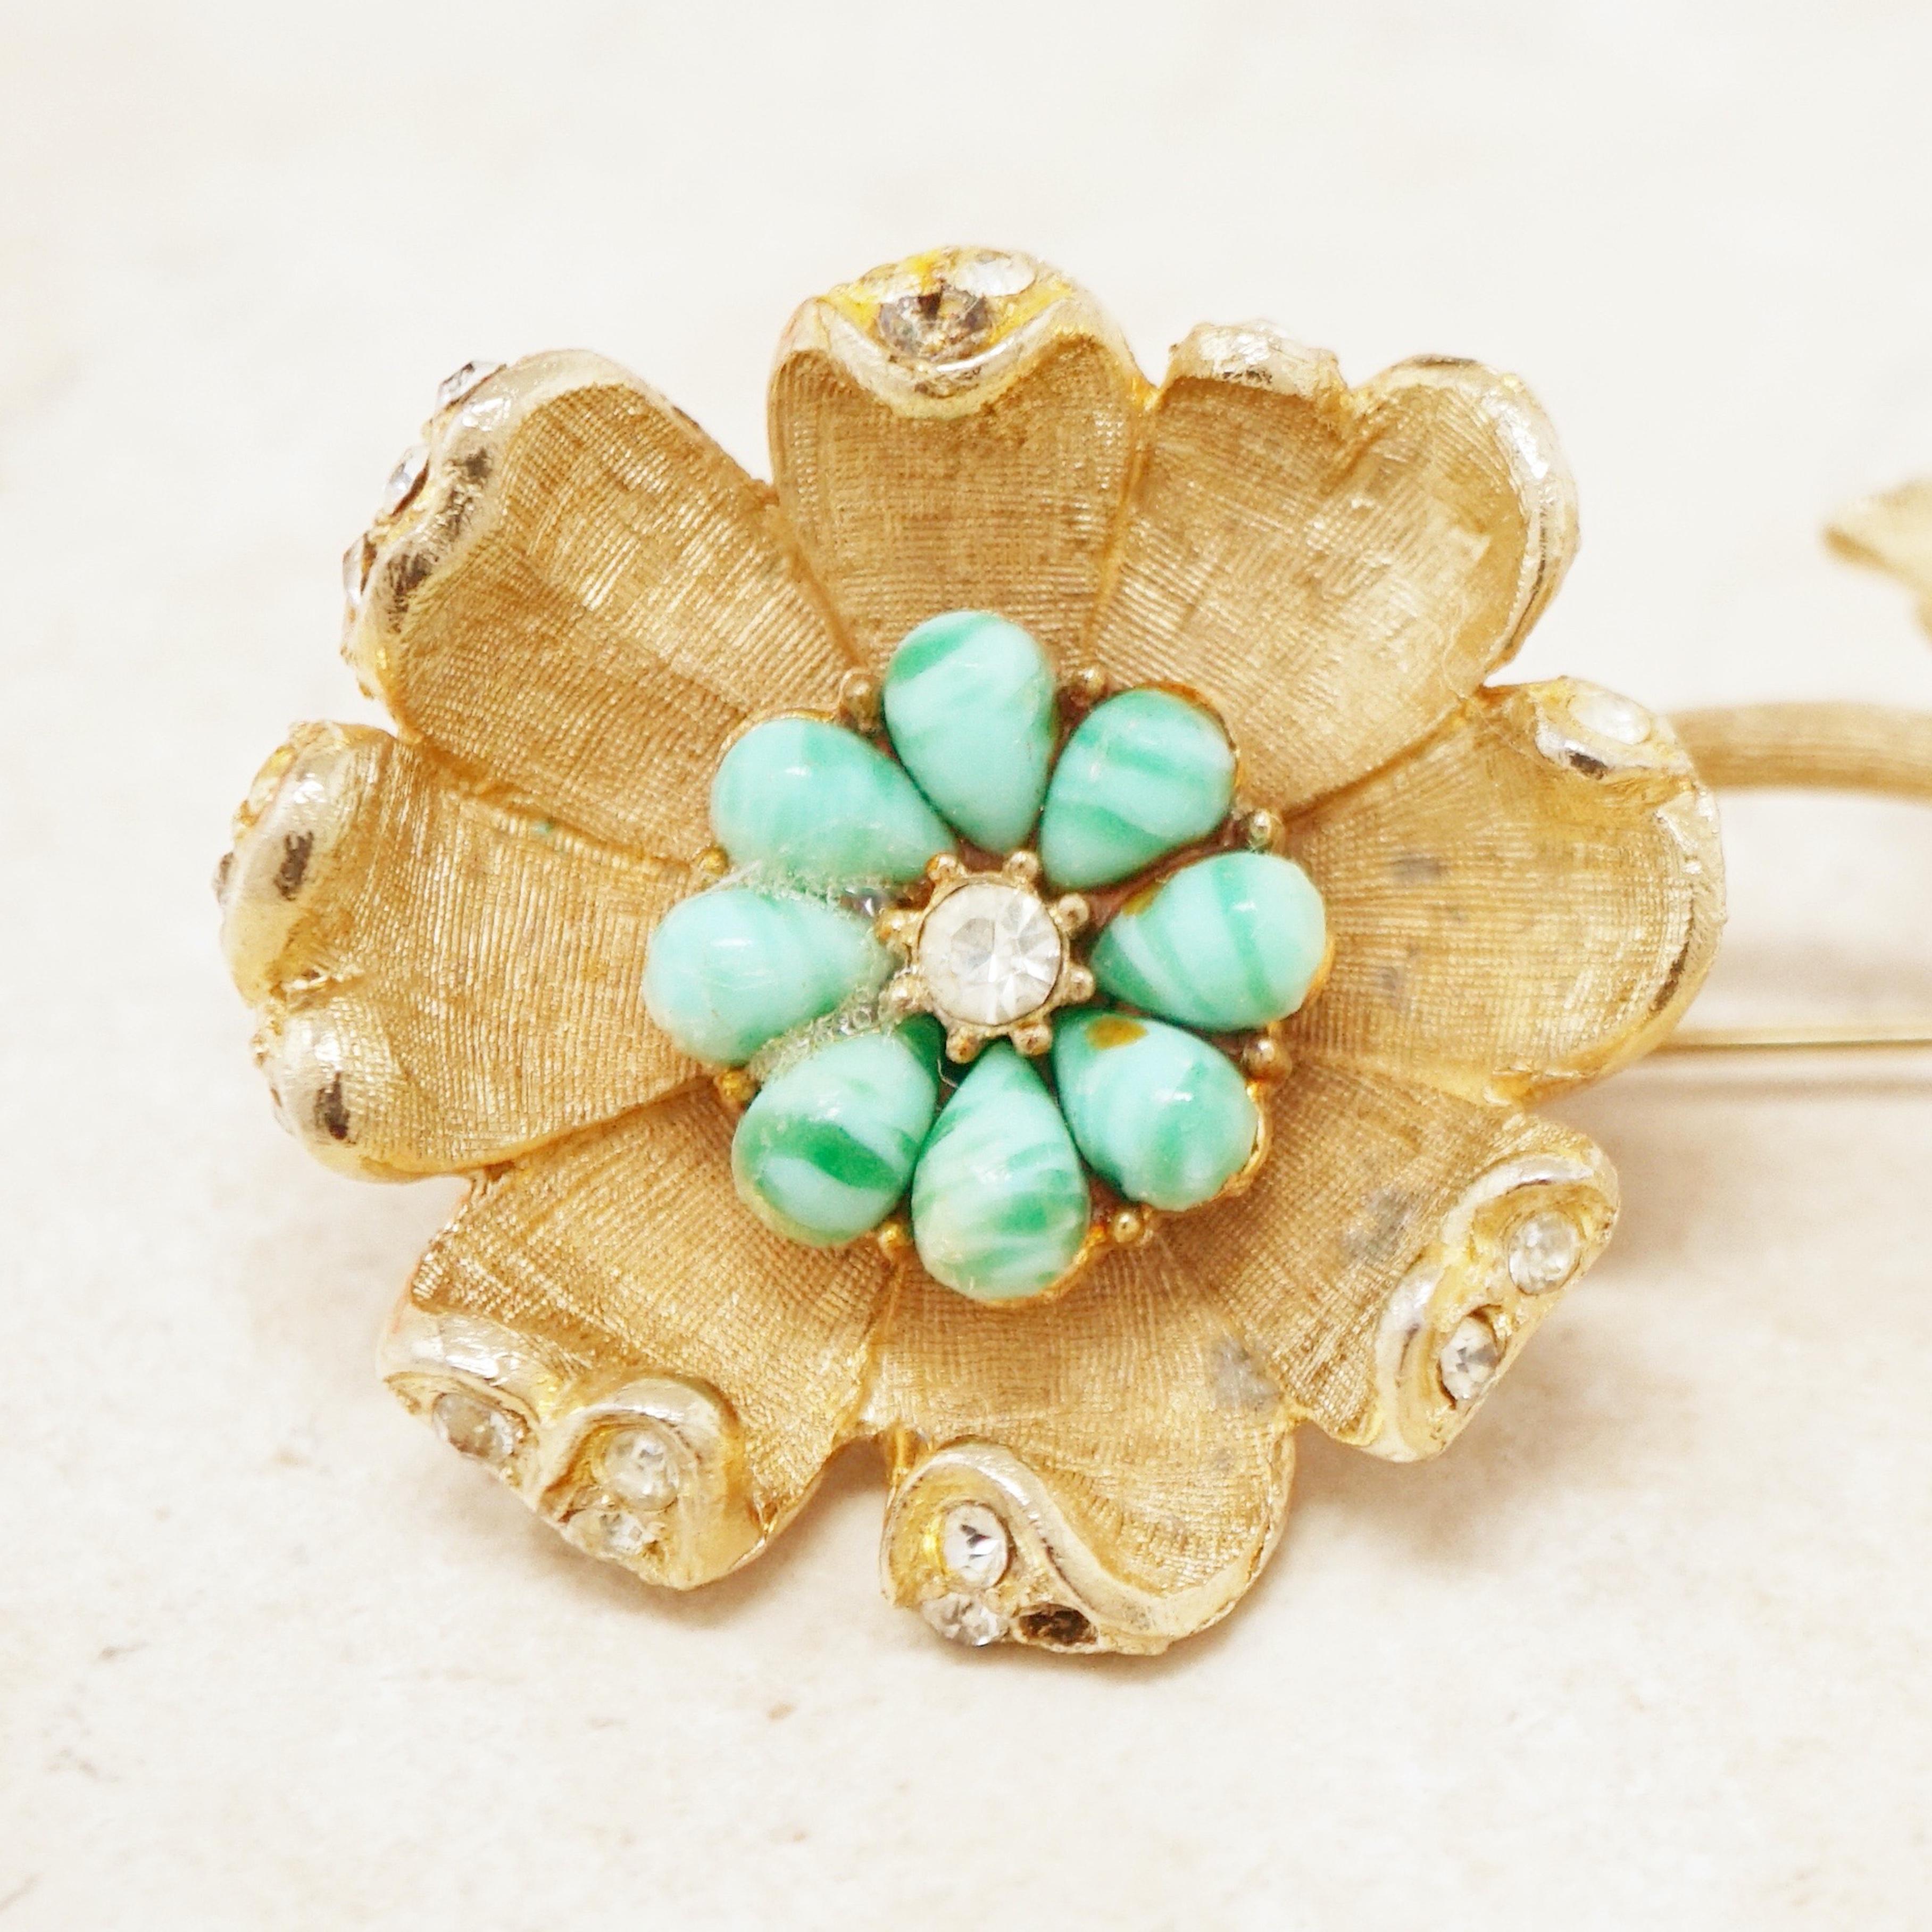 Modern Vintage Gilded Flower Brooch with Turquoise Art Glass Cabochons by Coro, 1950s